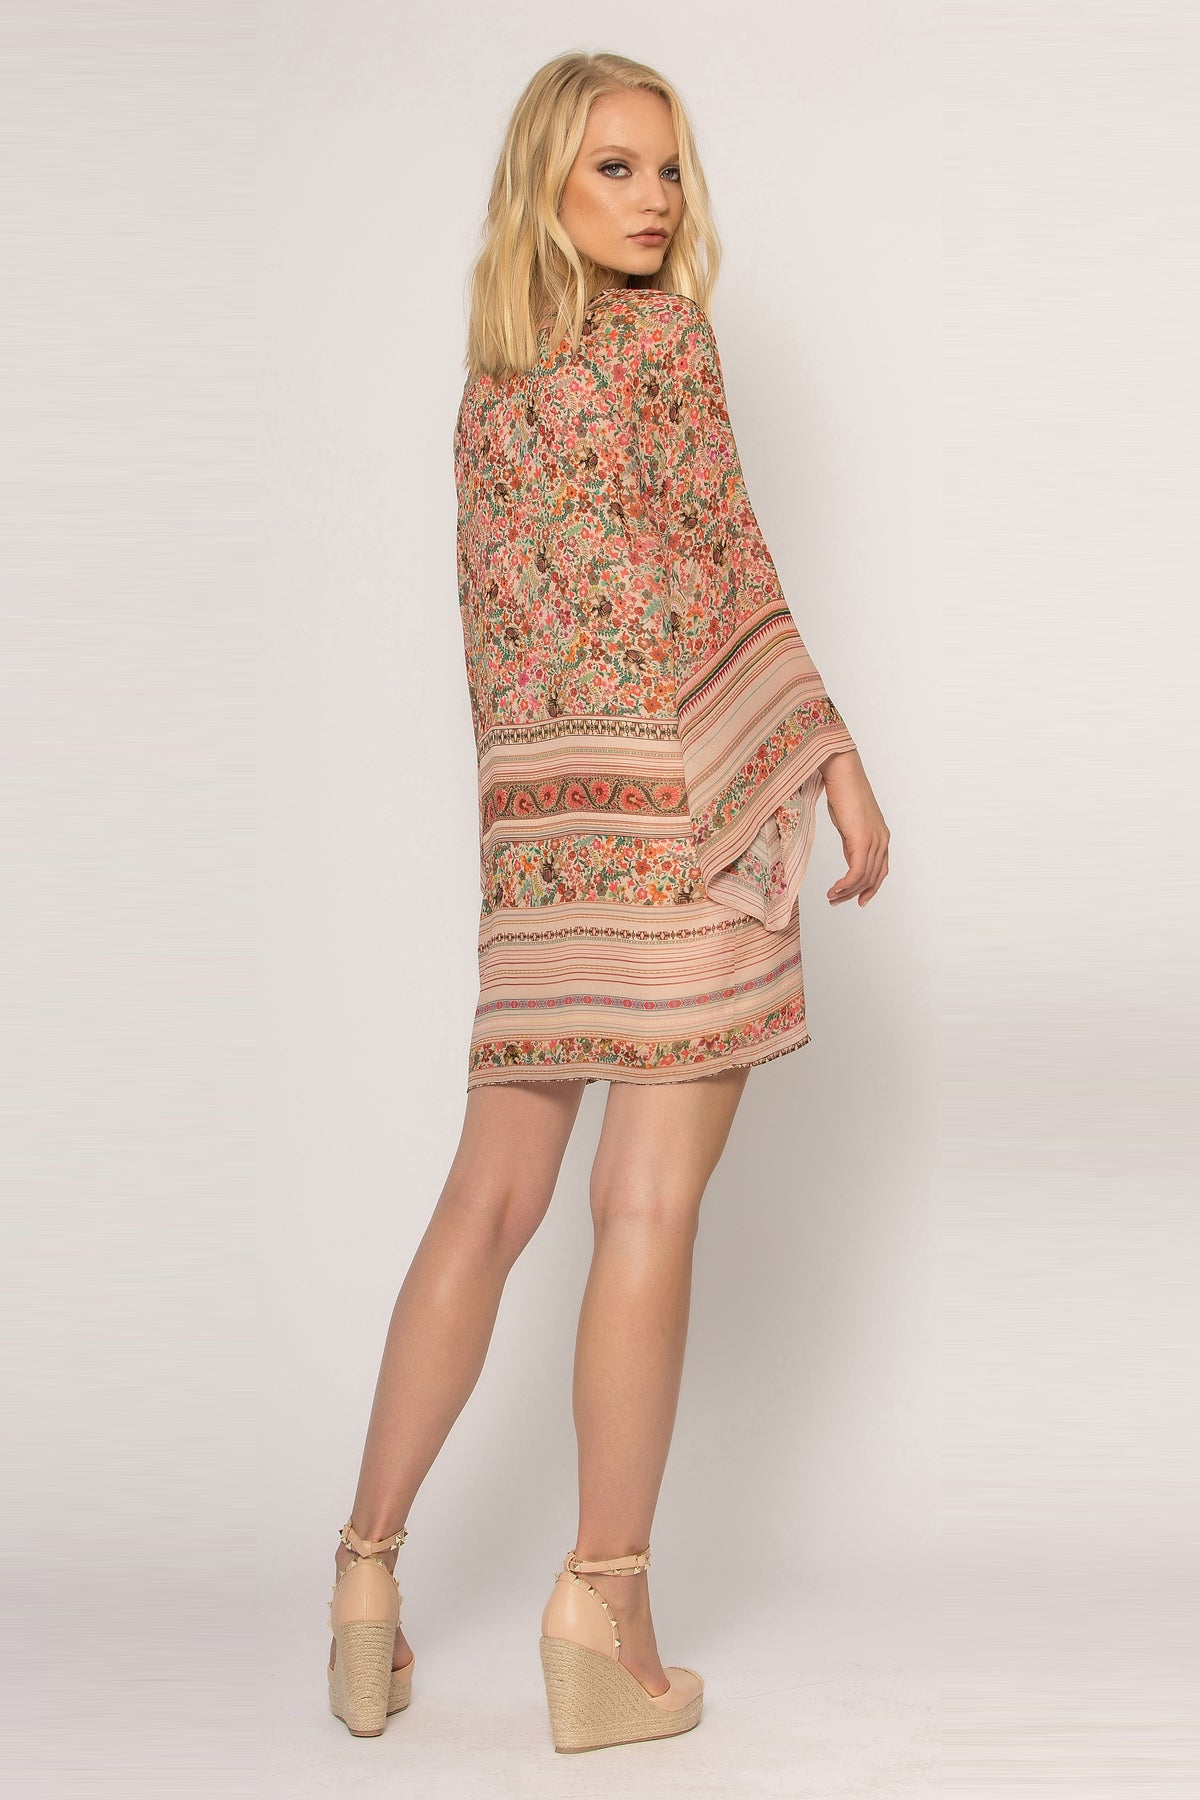 Khaki Bell Sleeve Floral Dress | by Lavender Brown